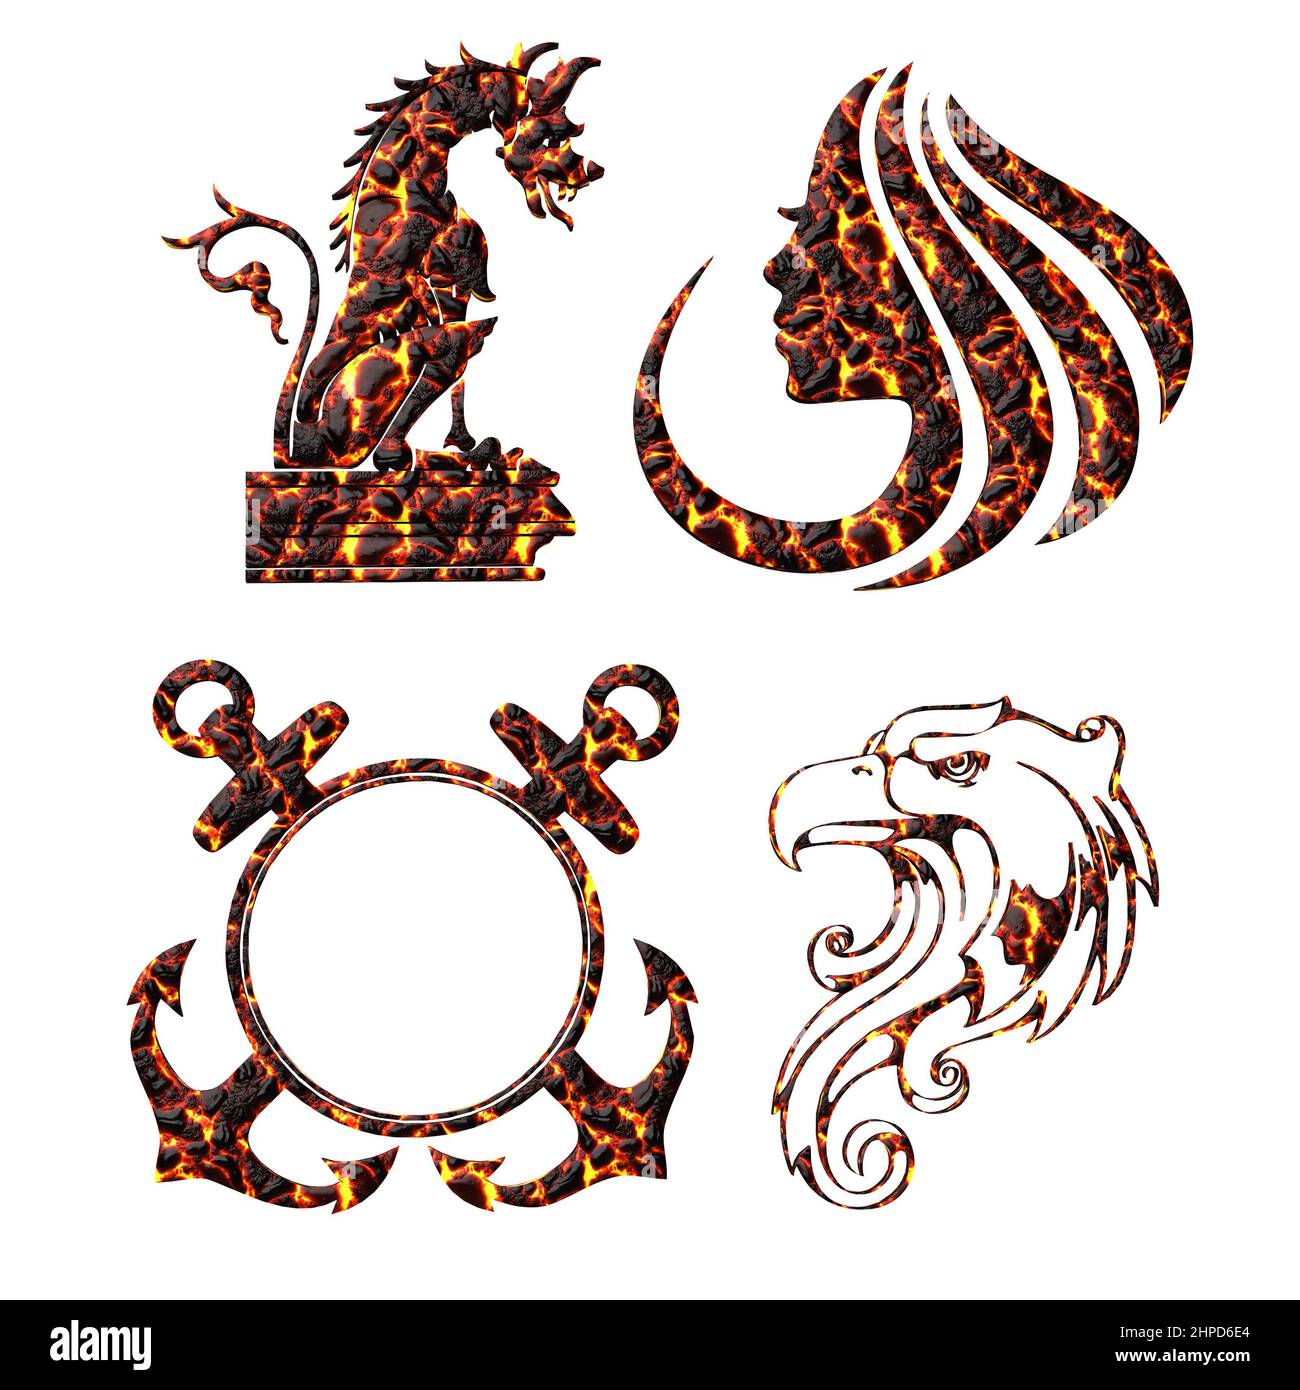 Eagle, Dragon, Anchor, Woman’s Face Set of Symbols, in Natural Materials, 3D Illustration, 3D Rendering Stock Photo